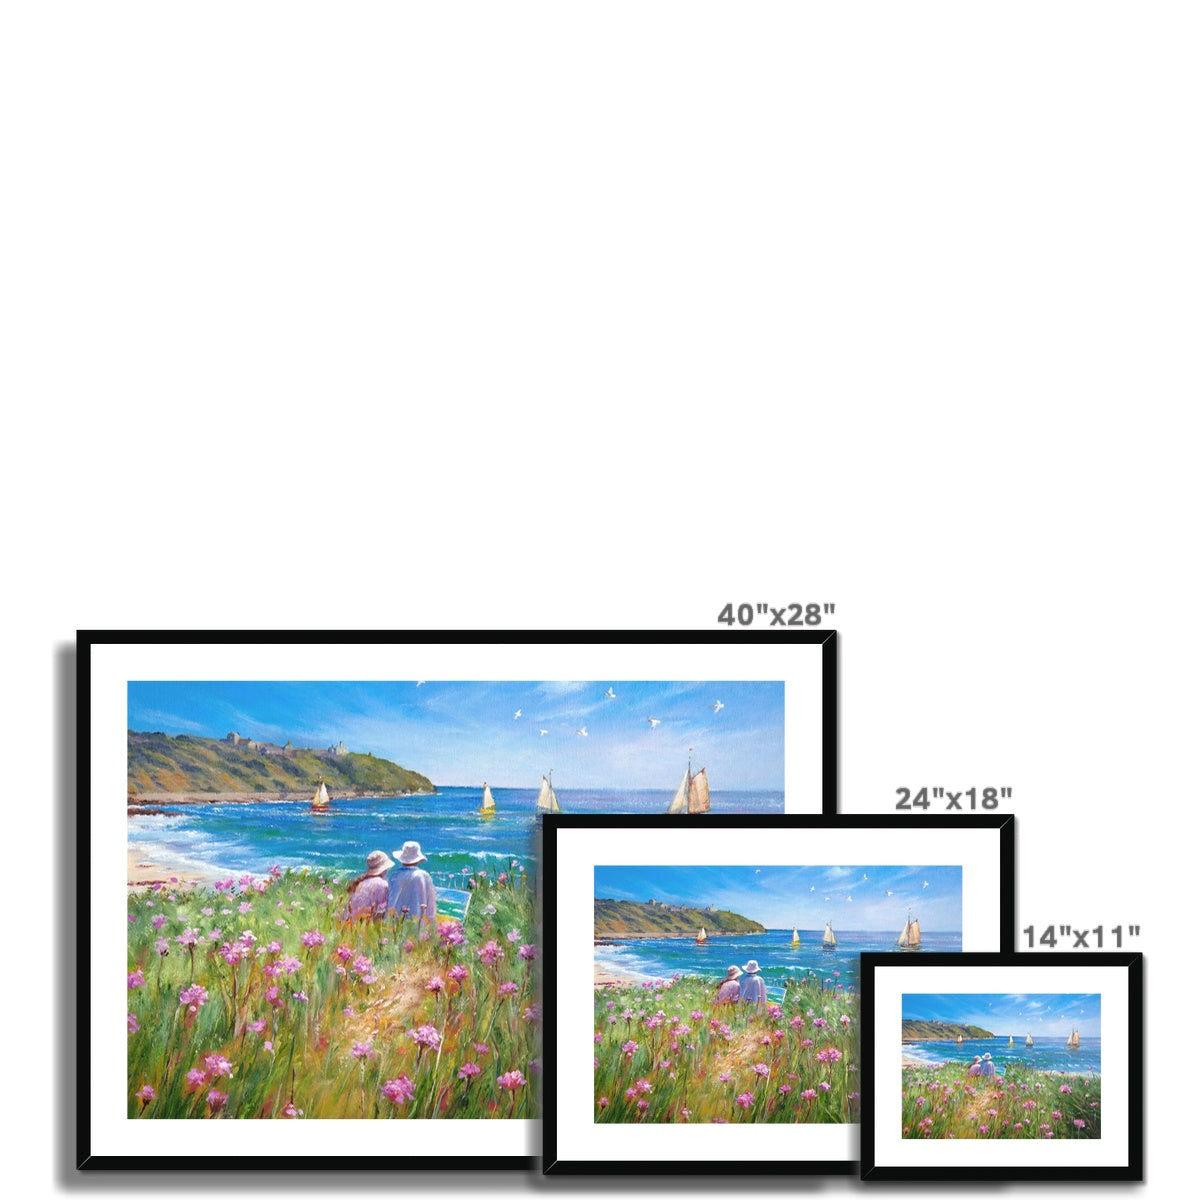 Ted Dyer Framed Open Edition Coastal Cornish Fine Art Print. &#39;Sea Pinks and Painters, Falmouth&#39;. Cornwall Art Gallery